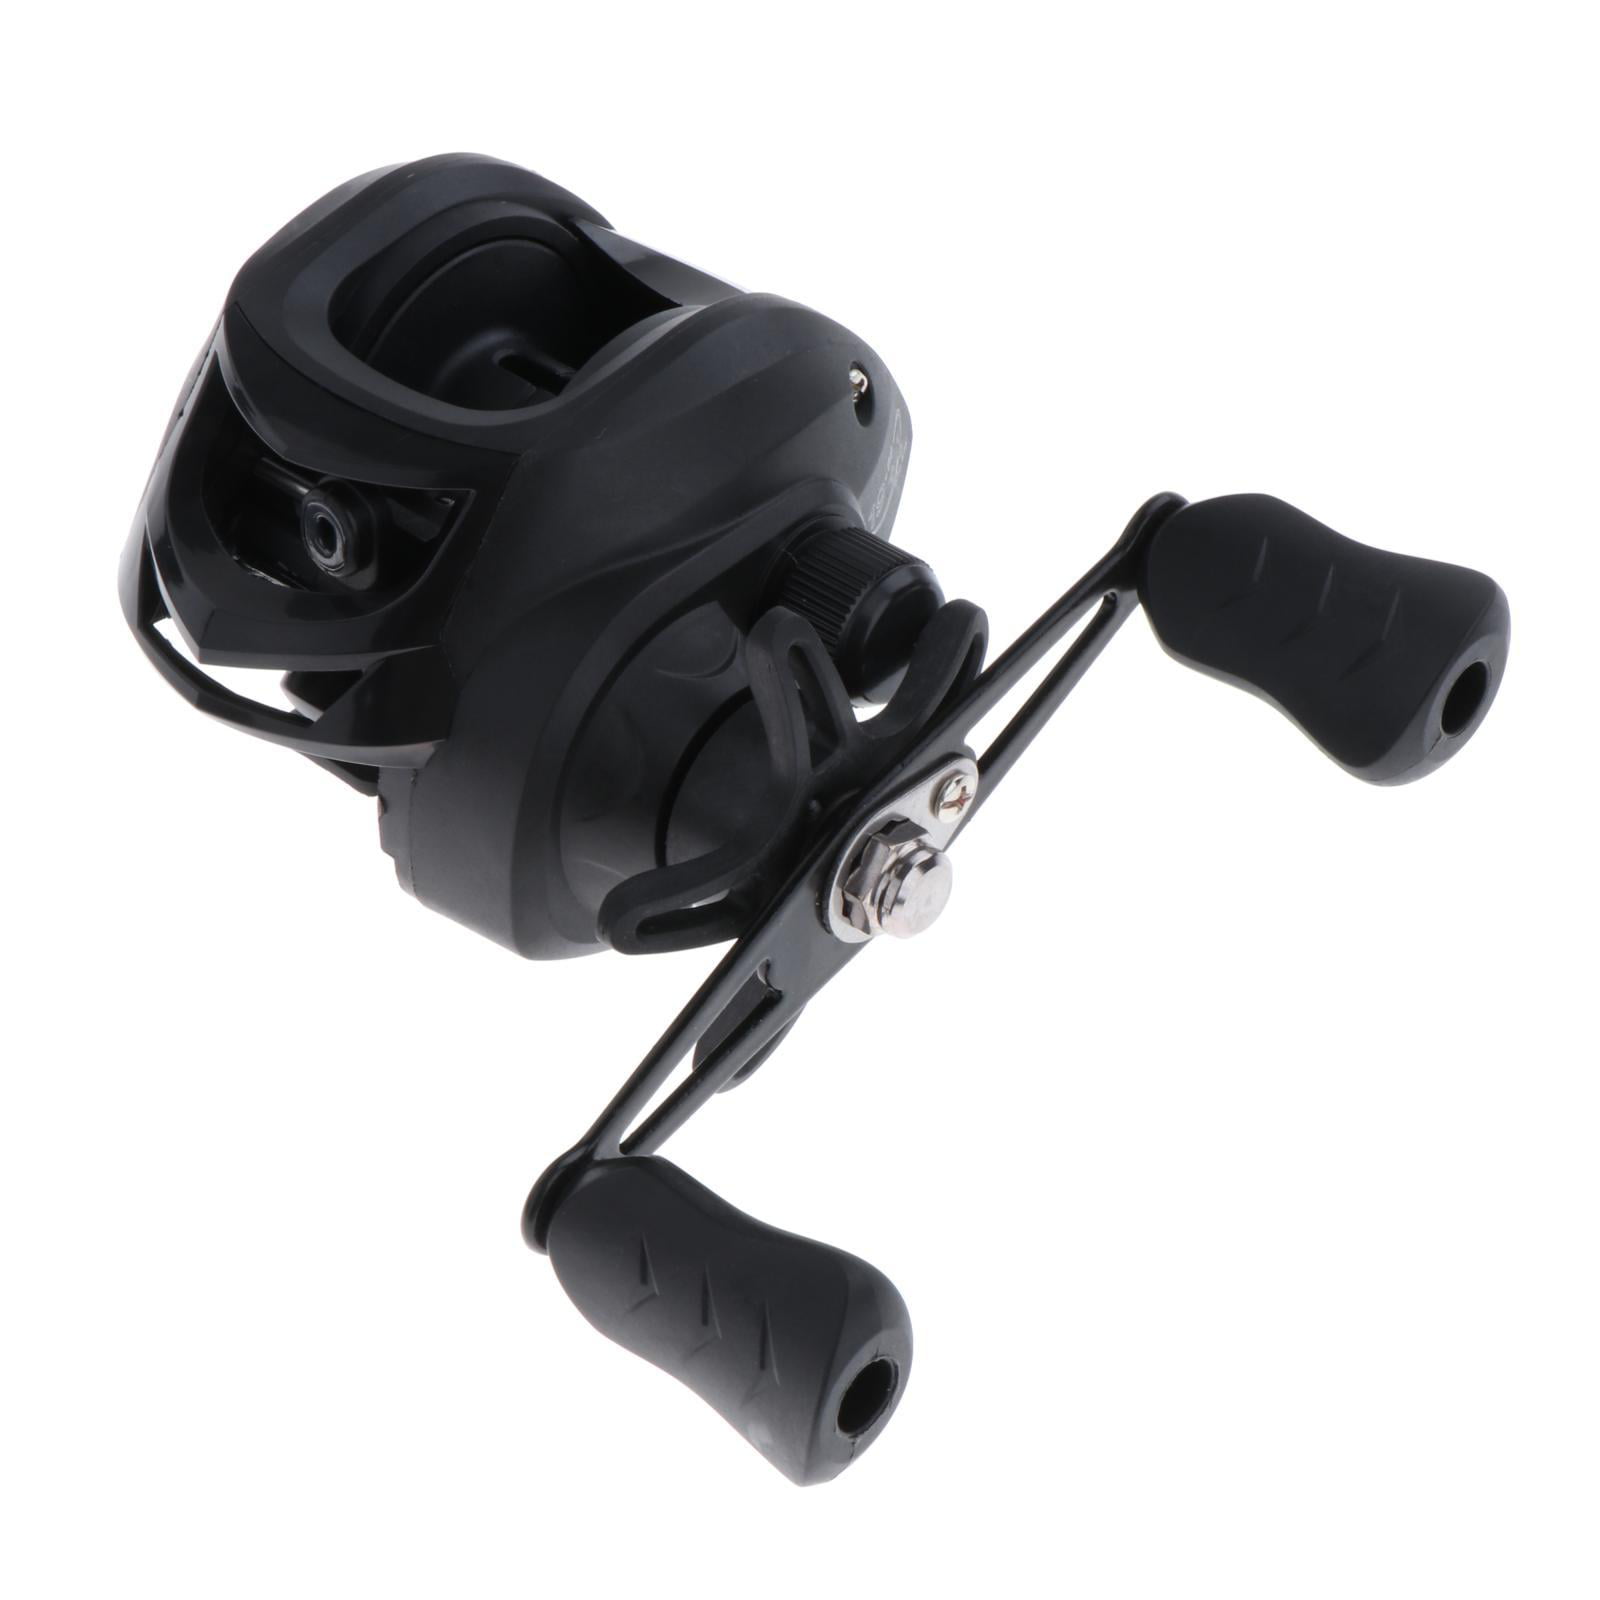 Baitcasting Reels 7:2:1 Baitcaster Fishing Reel 18+1 BB for Catfish Salmon  , Right, As described